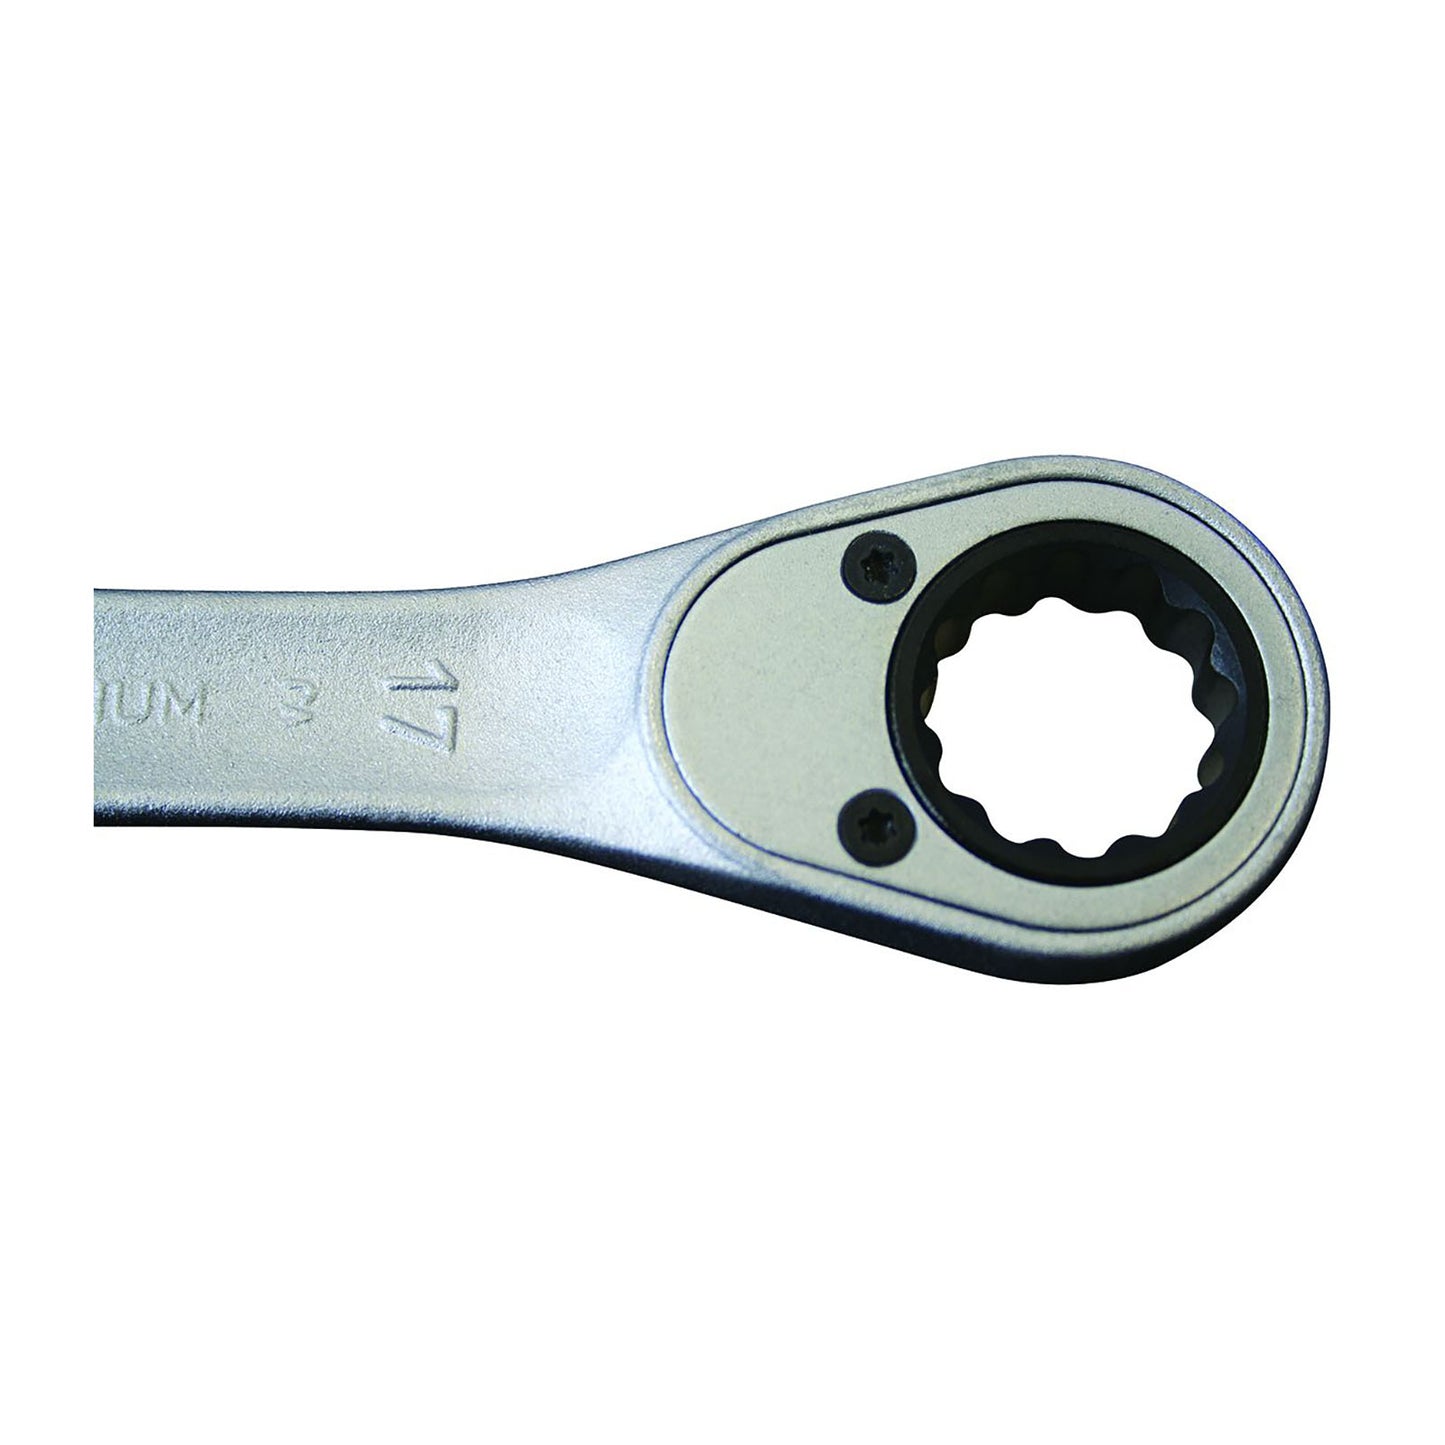 GEDORE 7 R 27 - Ratchet combination wrench, 27mm (2297213)